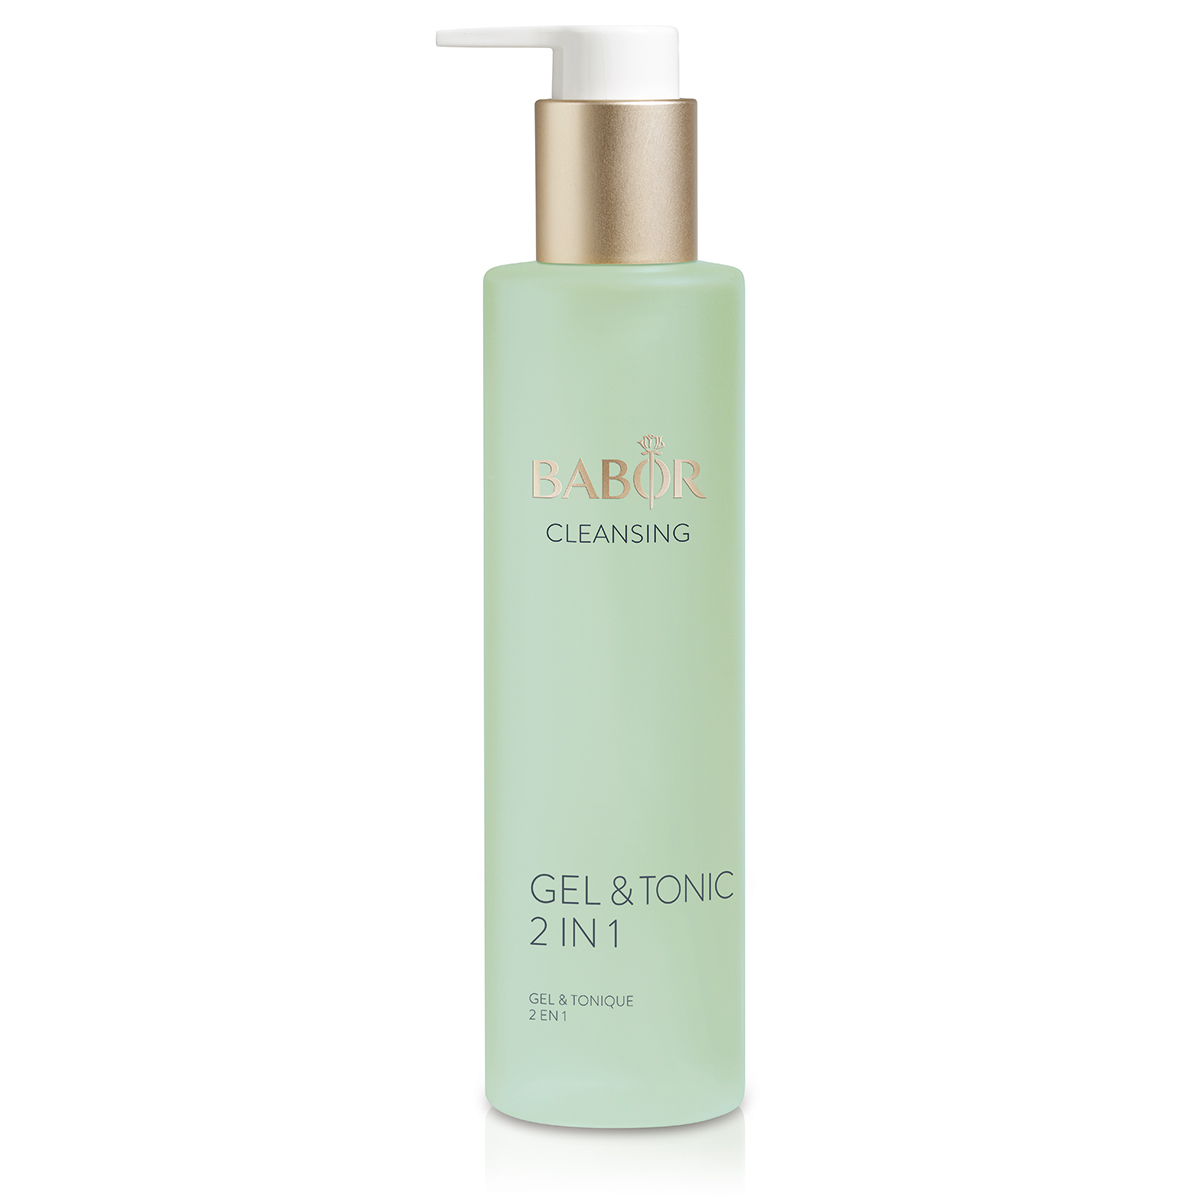 Babor Cleansing Gel & Tonic 2 in 1